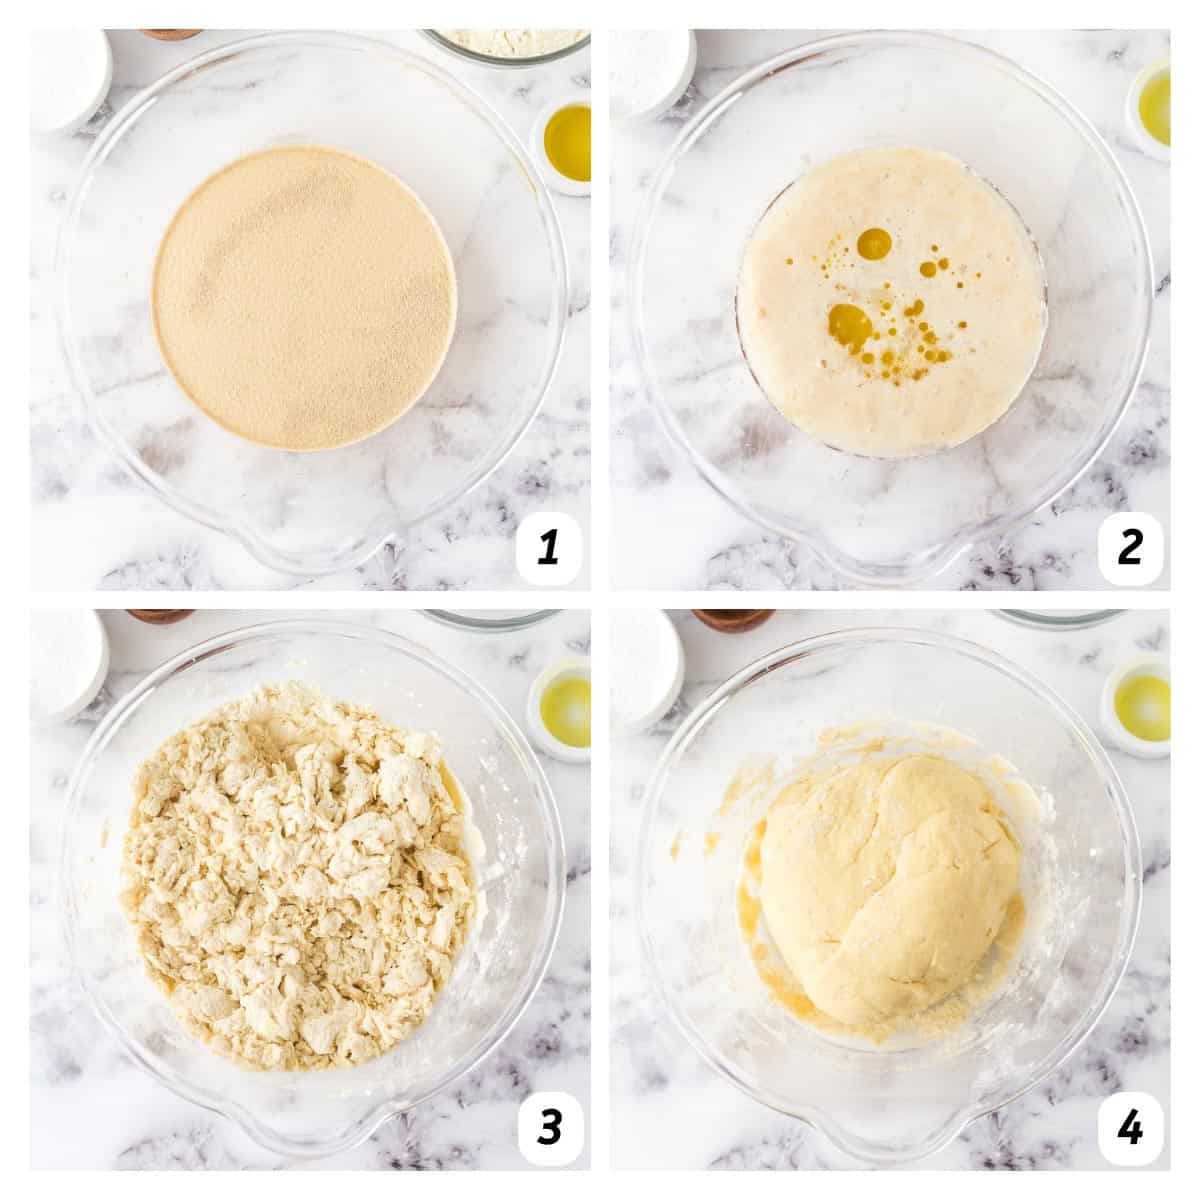 Four panel grid of process shots 1-4 - combining yeast, water, sugar, olive oil, and honey to form dough.